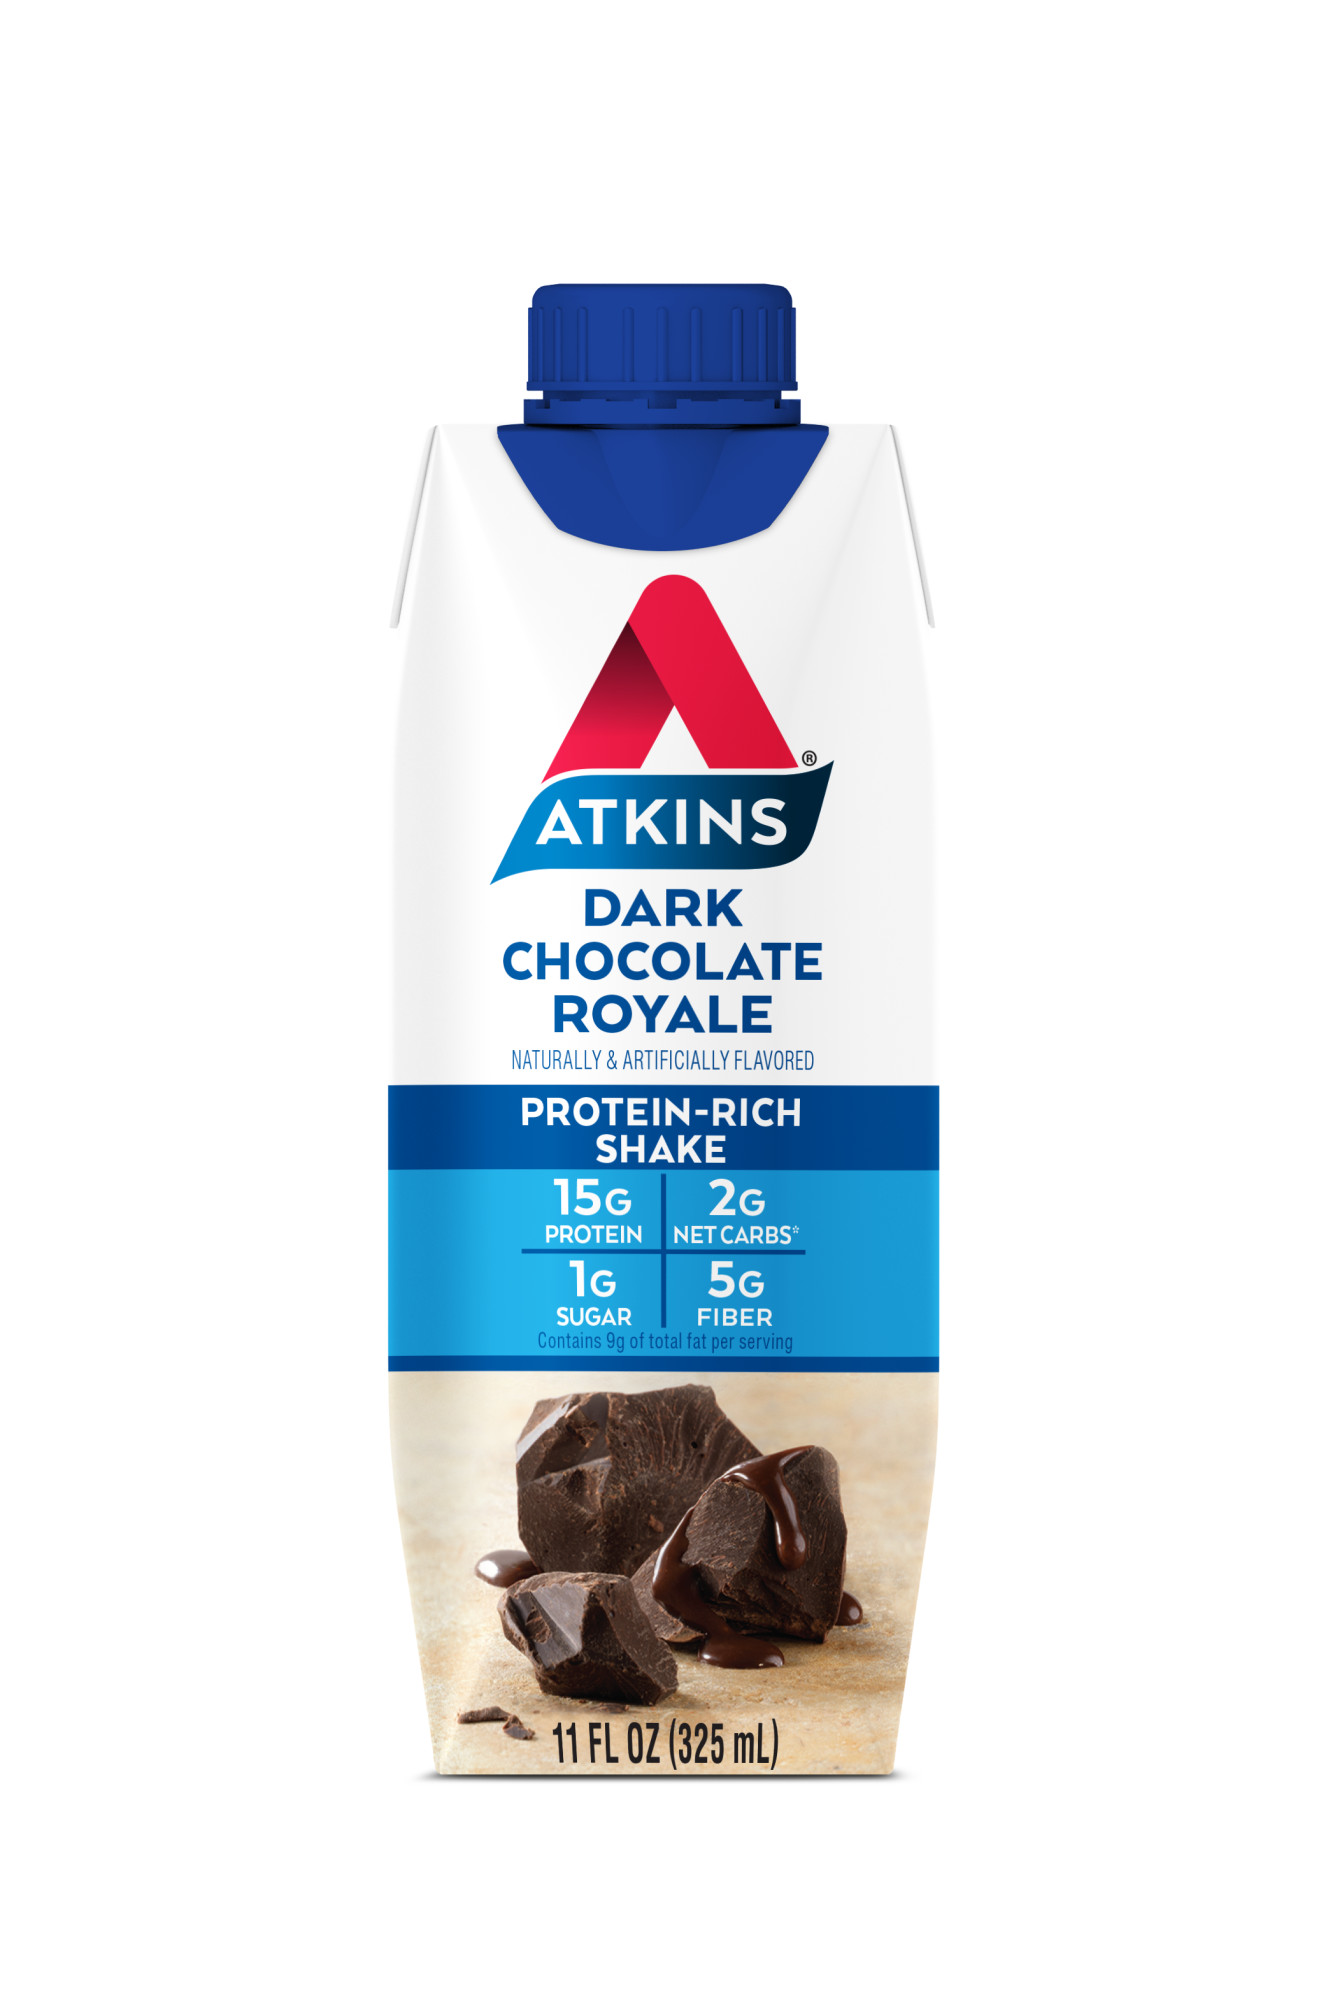 (3 pack) Atkins Dark Chocolate Royale Protein Shake, High Protein, Low Carb, Keto Friendly, Gluten Free, 11fl oz, 4 Ct - image 3 of 9